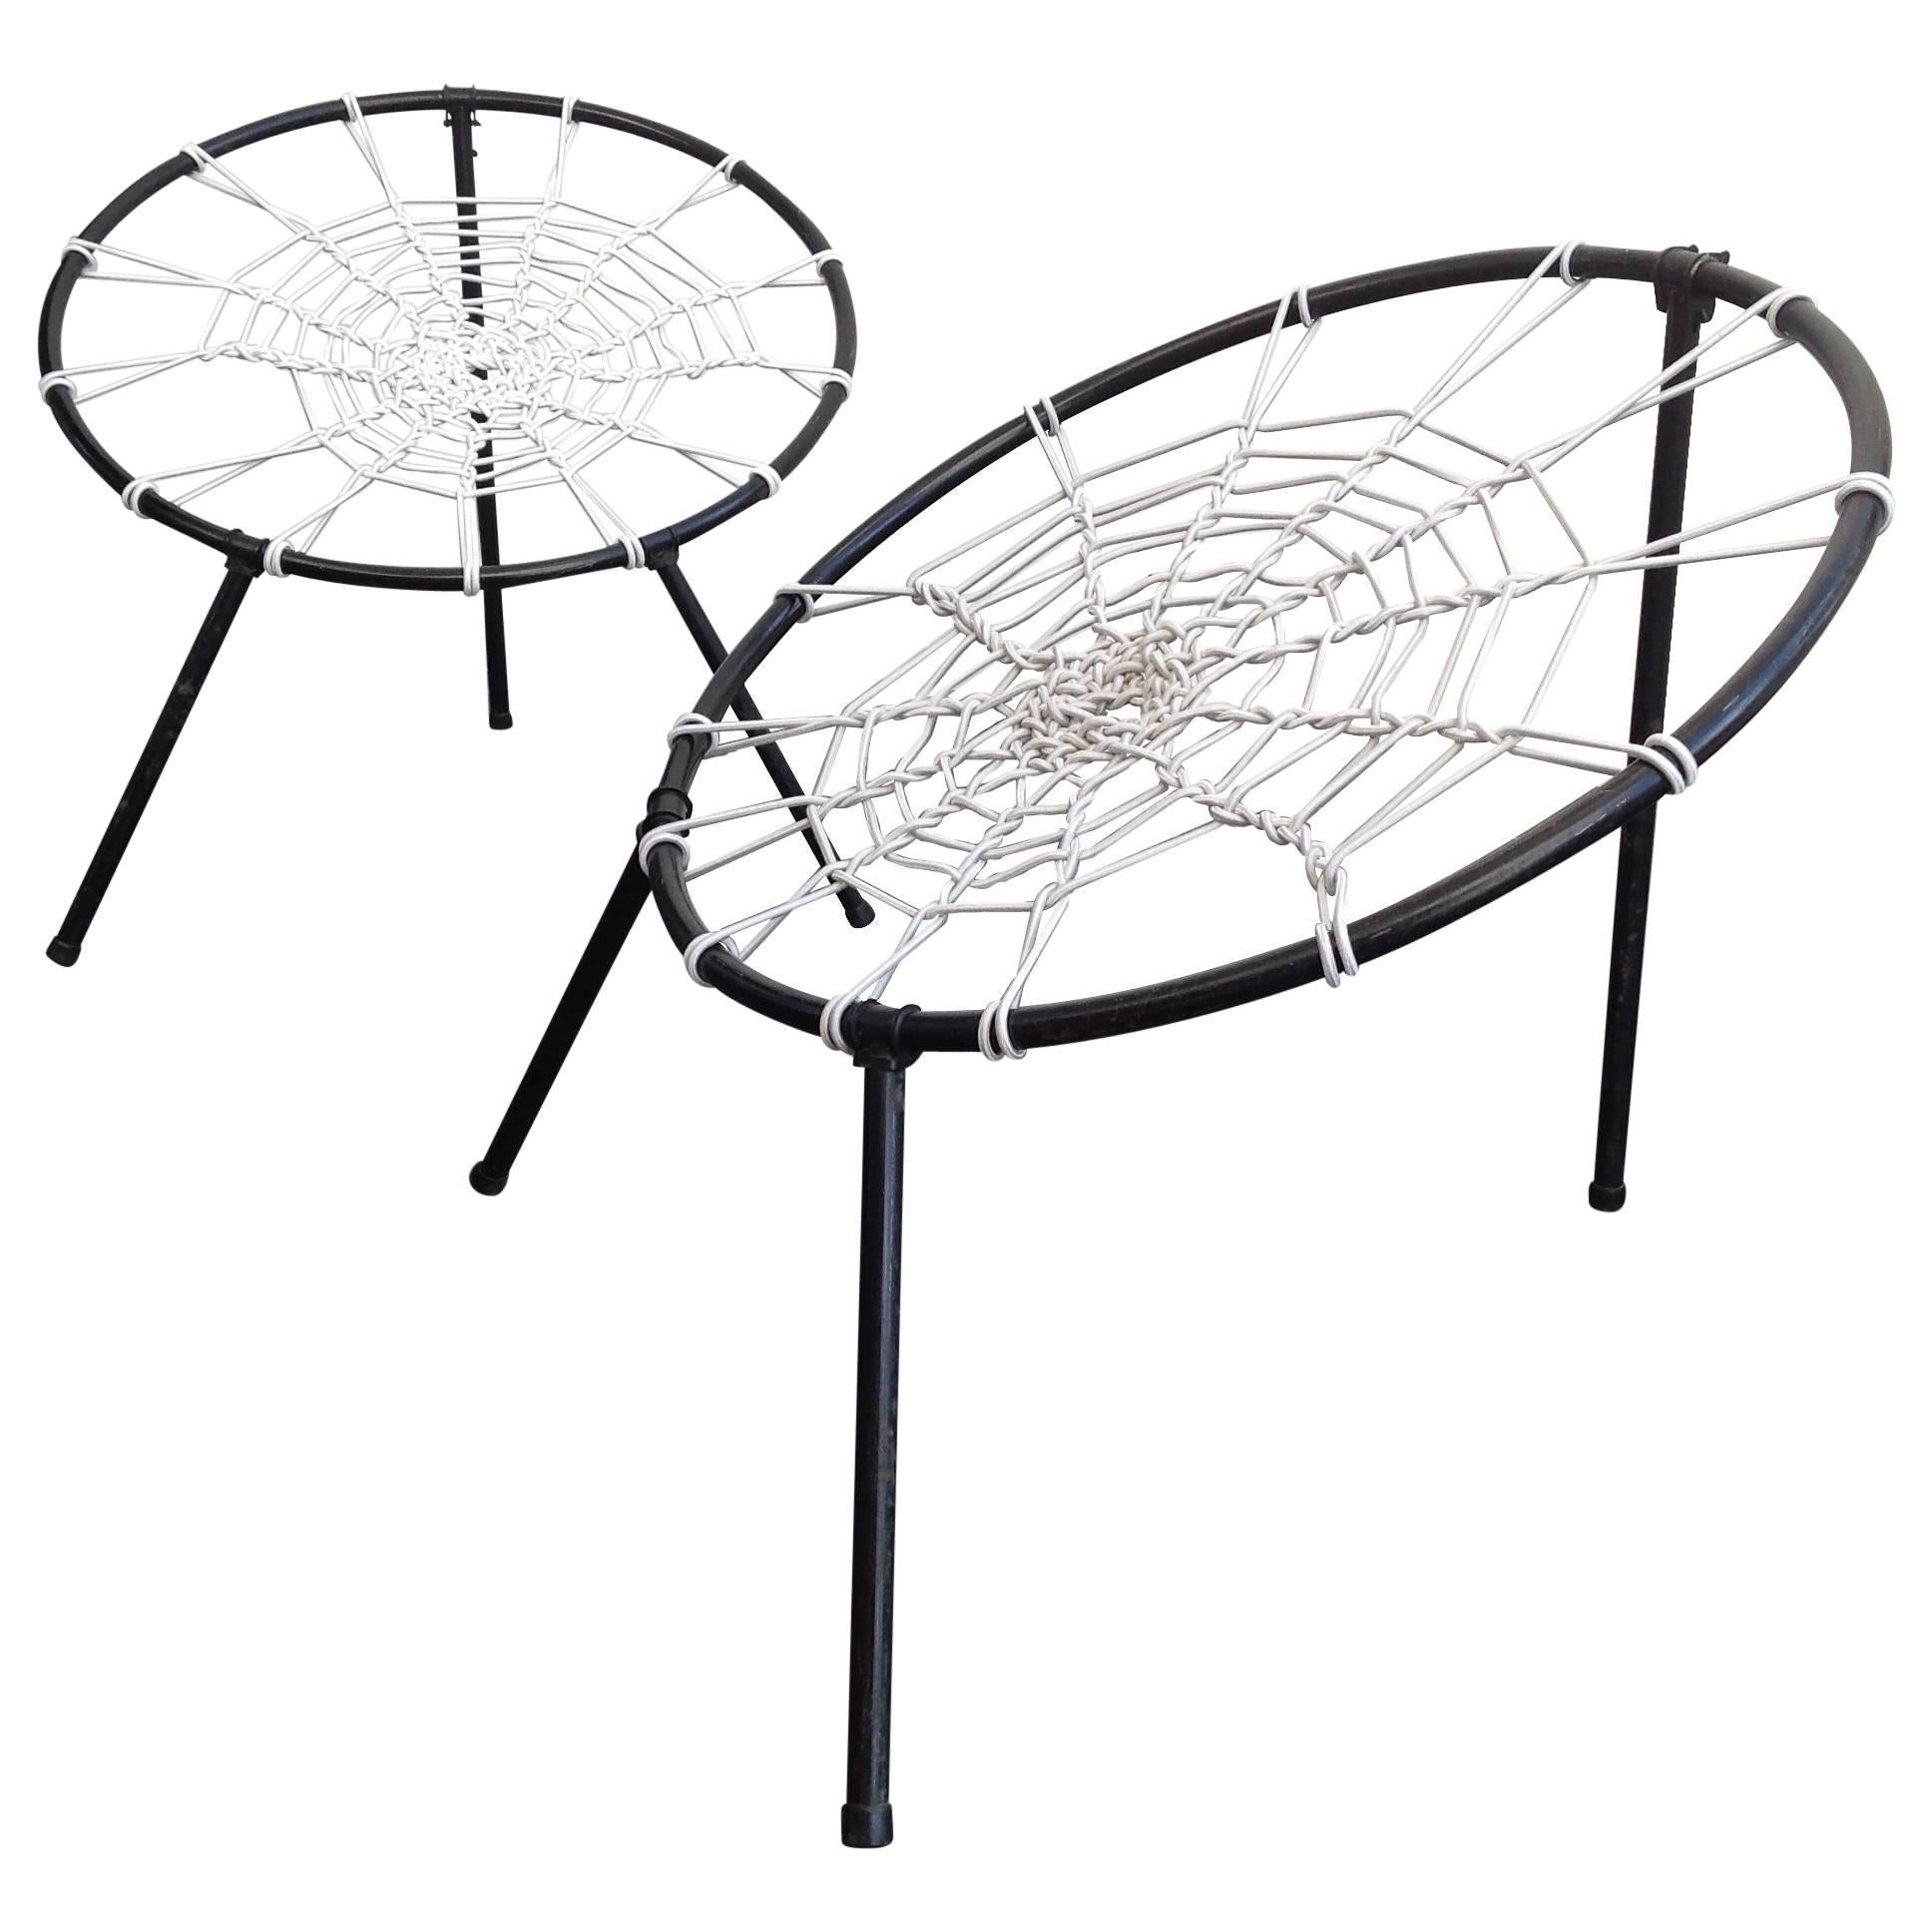 Original, First Edition Spider Web Folding Chairs by "PLAN" Made in France For Sale